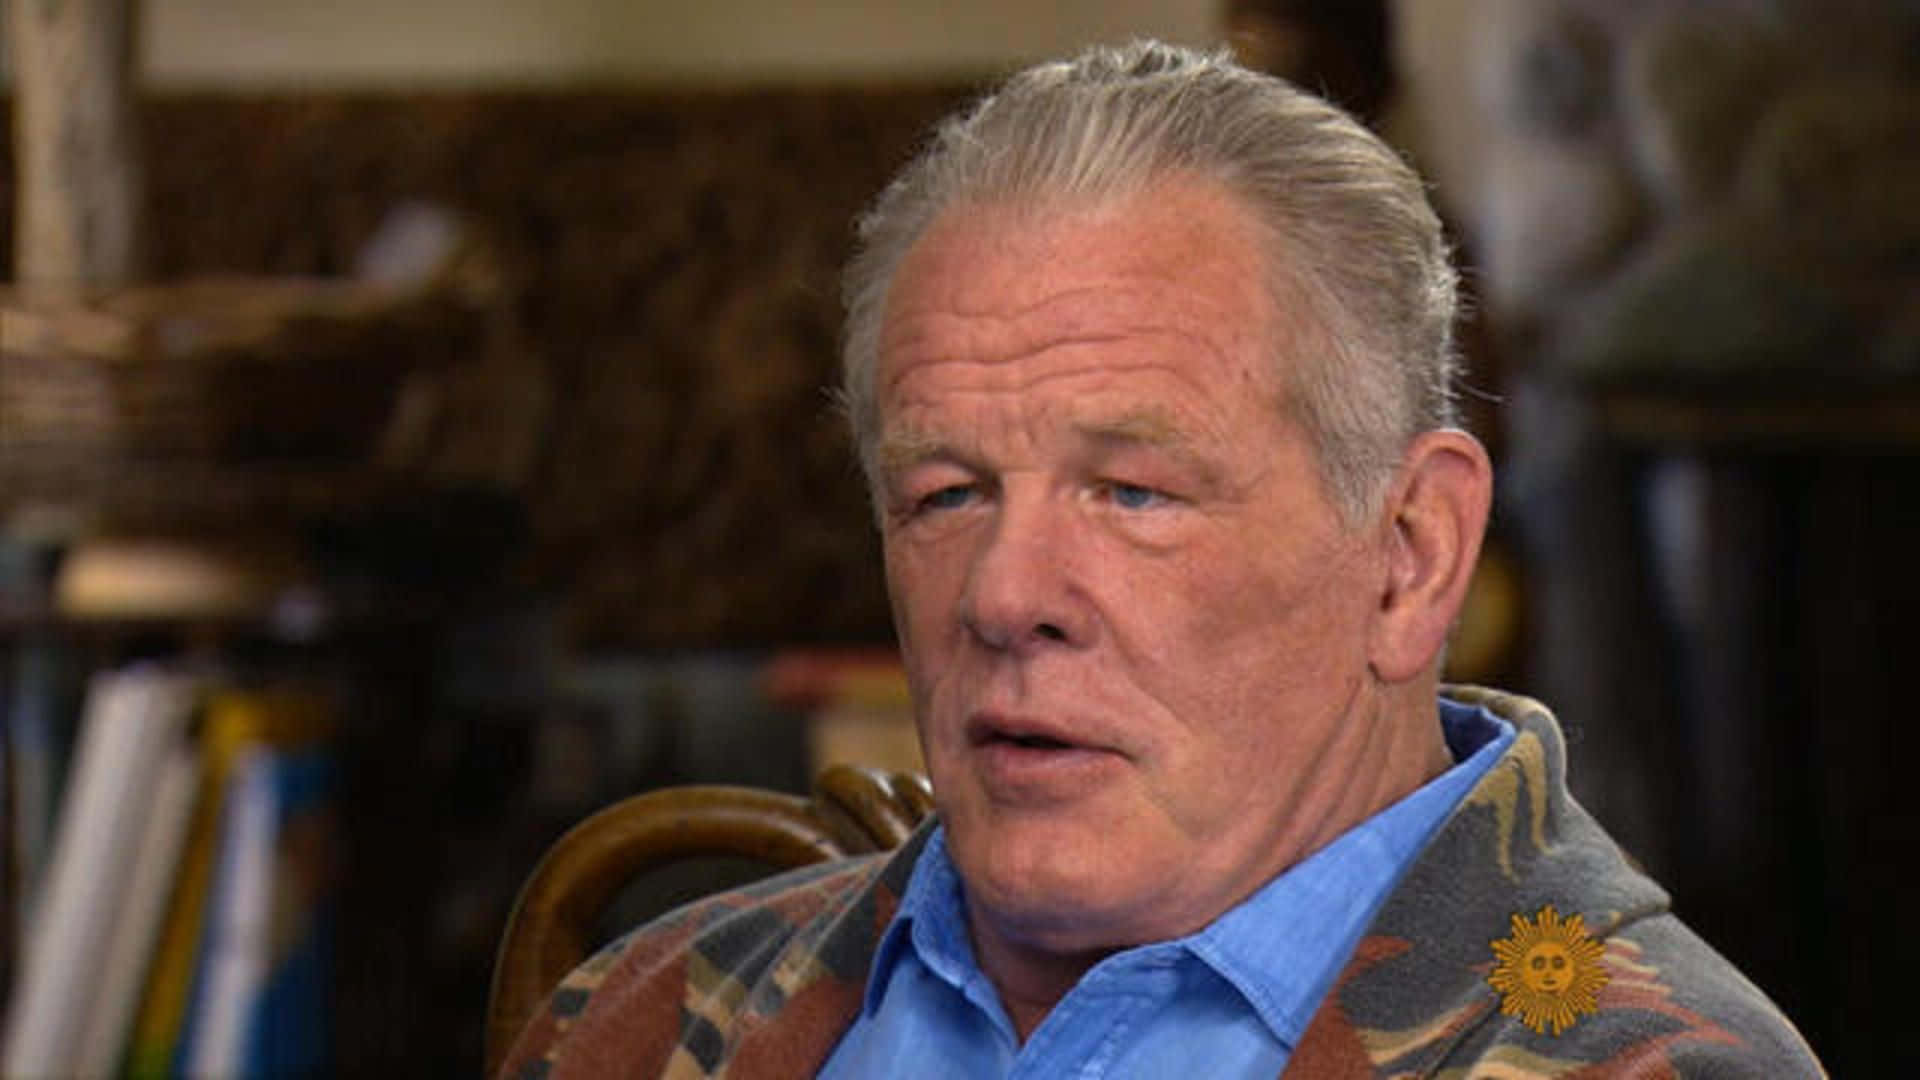 Nick Nolte Looking Reflection in the Mirror Wallpaper